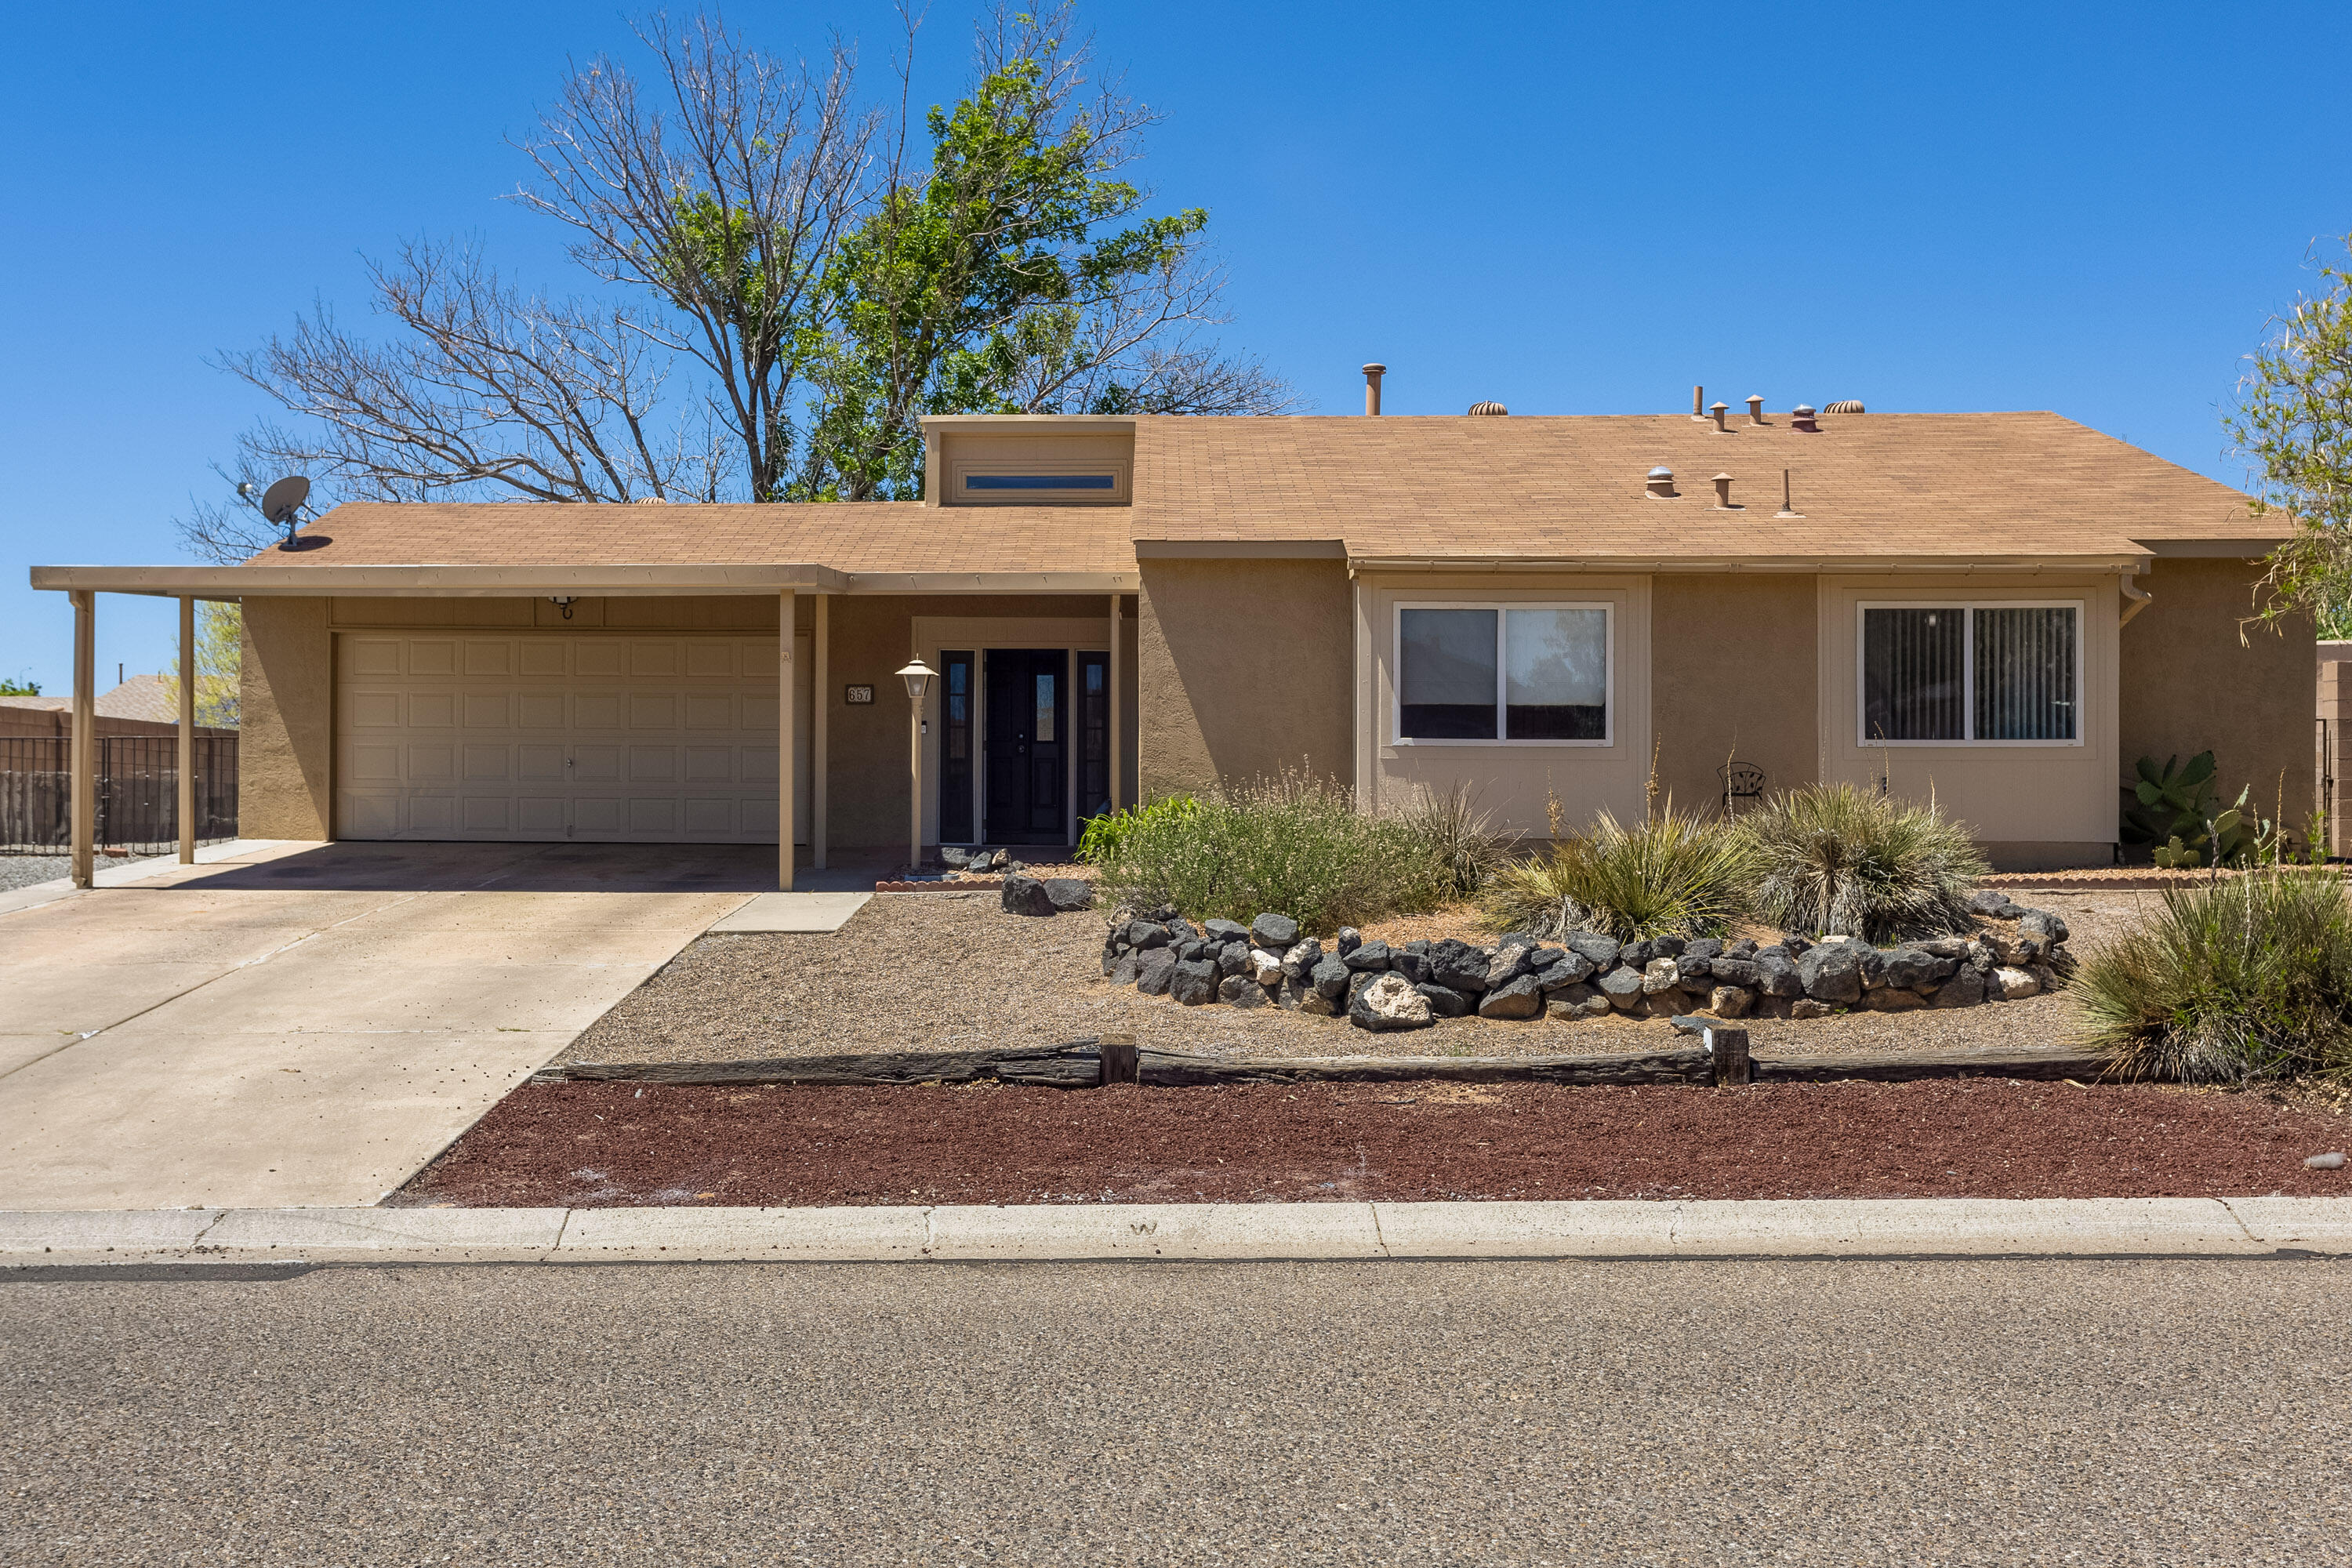 This centrally located RR gem has been meticulously maintained and upgraded. Refrigerated air installed in 2022, new furnace,  new water heater, and all poly piping replaced in 2021. Kitchen and both bathrooms remodeled in 2022 with new counter tops, new hardware, and some new appliances. Full landscaping front and back in 2022 and 2023, including raising the back privacy walls. Full exterior patching and paint in March 2024, full interior patch and paint in 2021. This beautiful home is waiting and ready to meet its new owners, COME AND SEE IT TODAY!